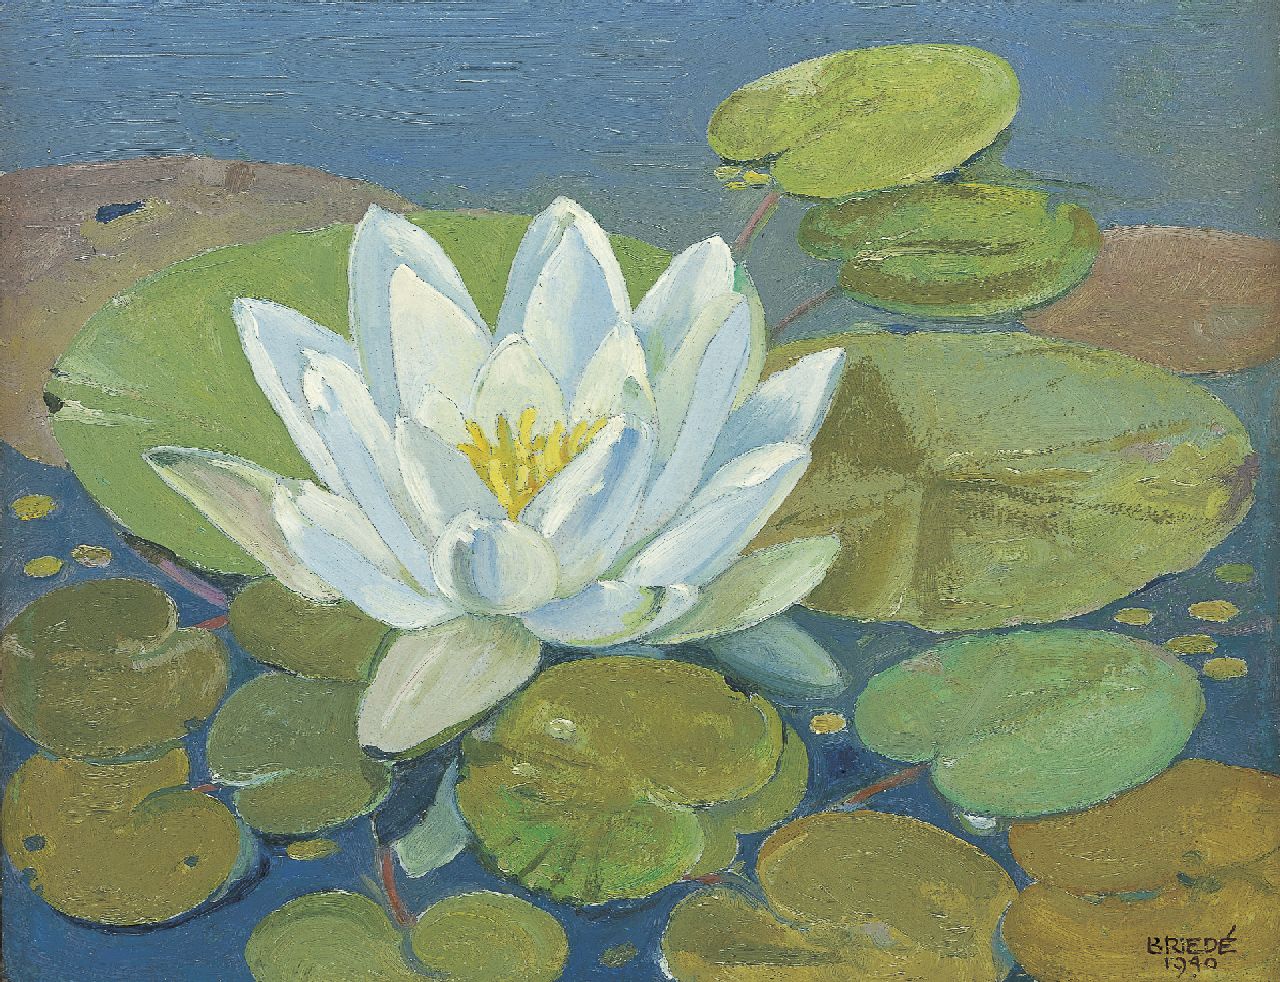 Briedé J.  | Johan Briedé, Water lily, 20.9 x 26.9 cm, signed l.r. and dated 1940